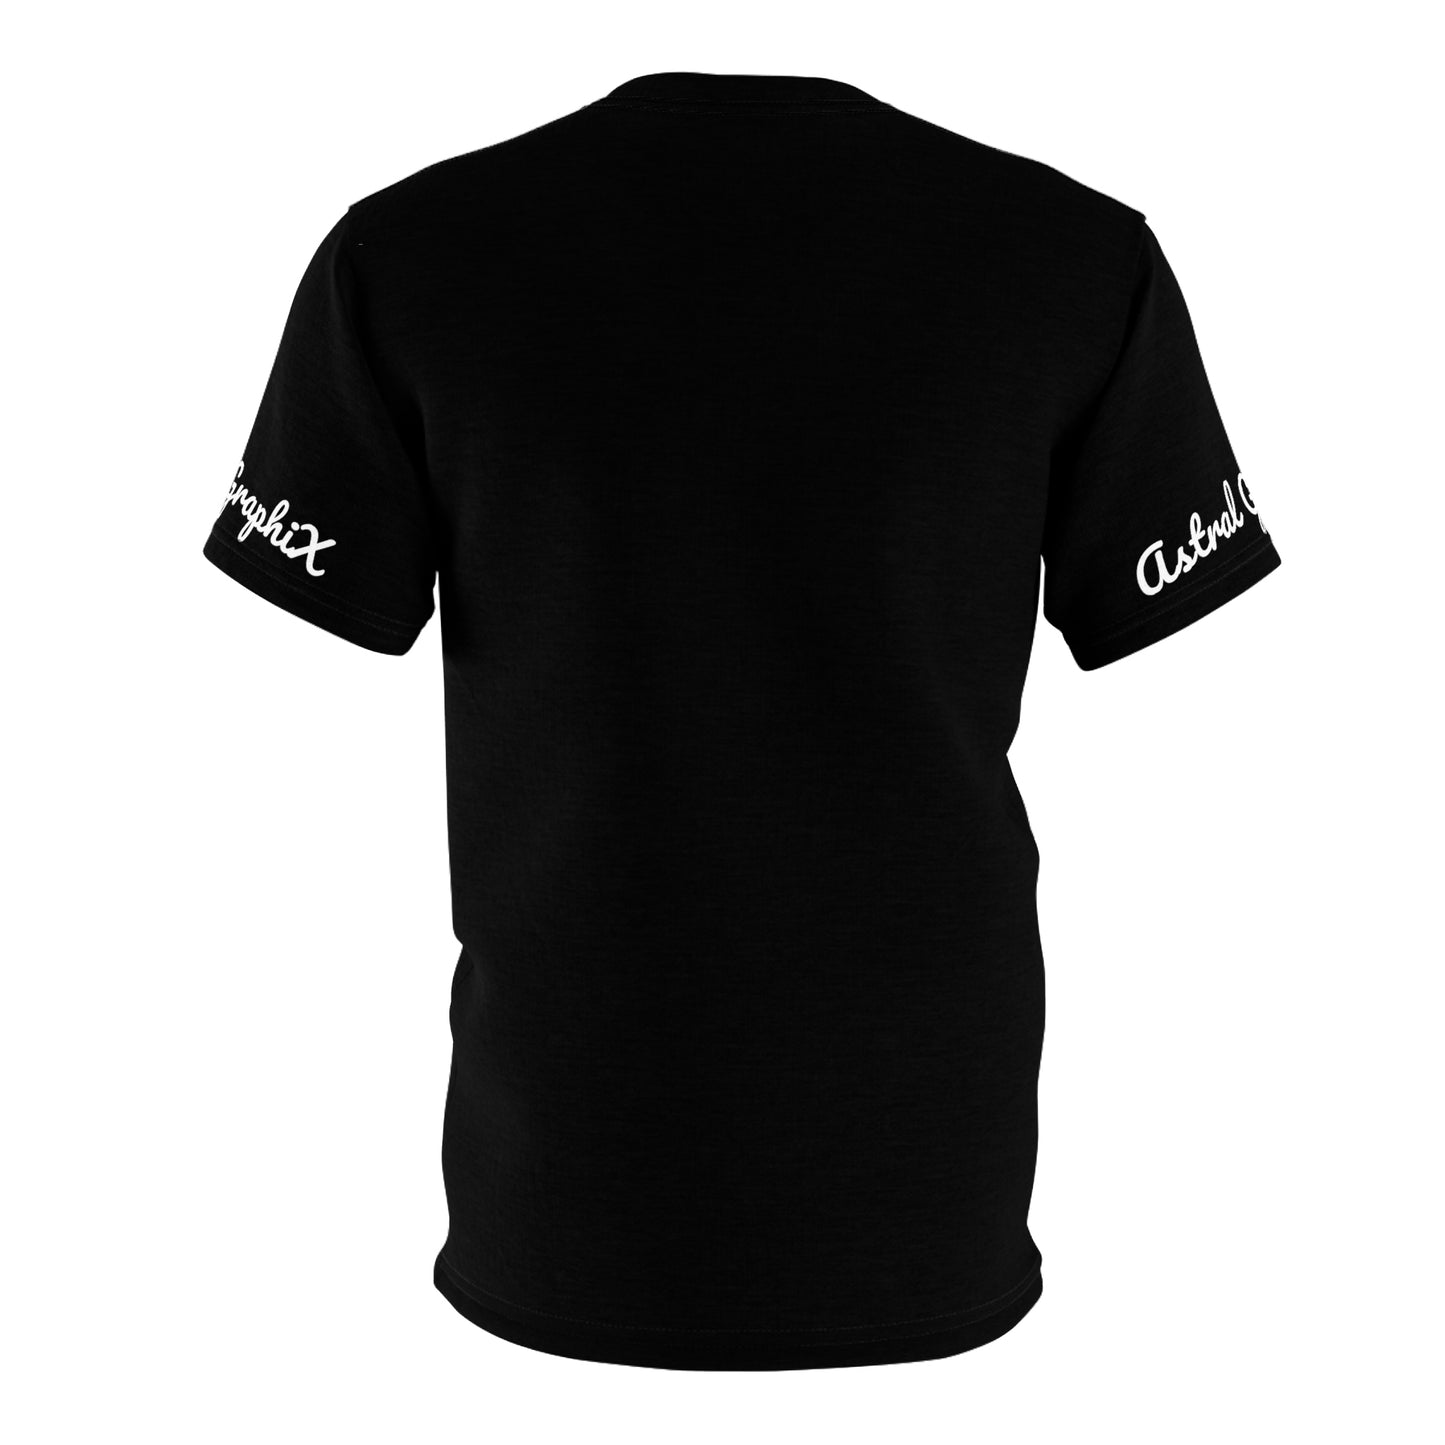 Word Art Collection - Unisex AOP Cut & Sew Tee - Fast or Last in Black